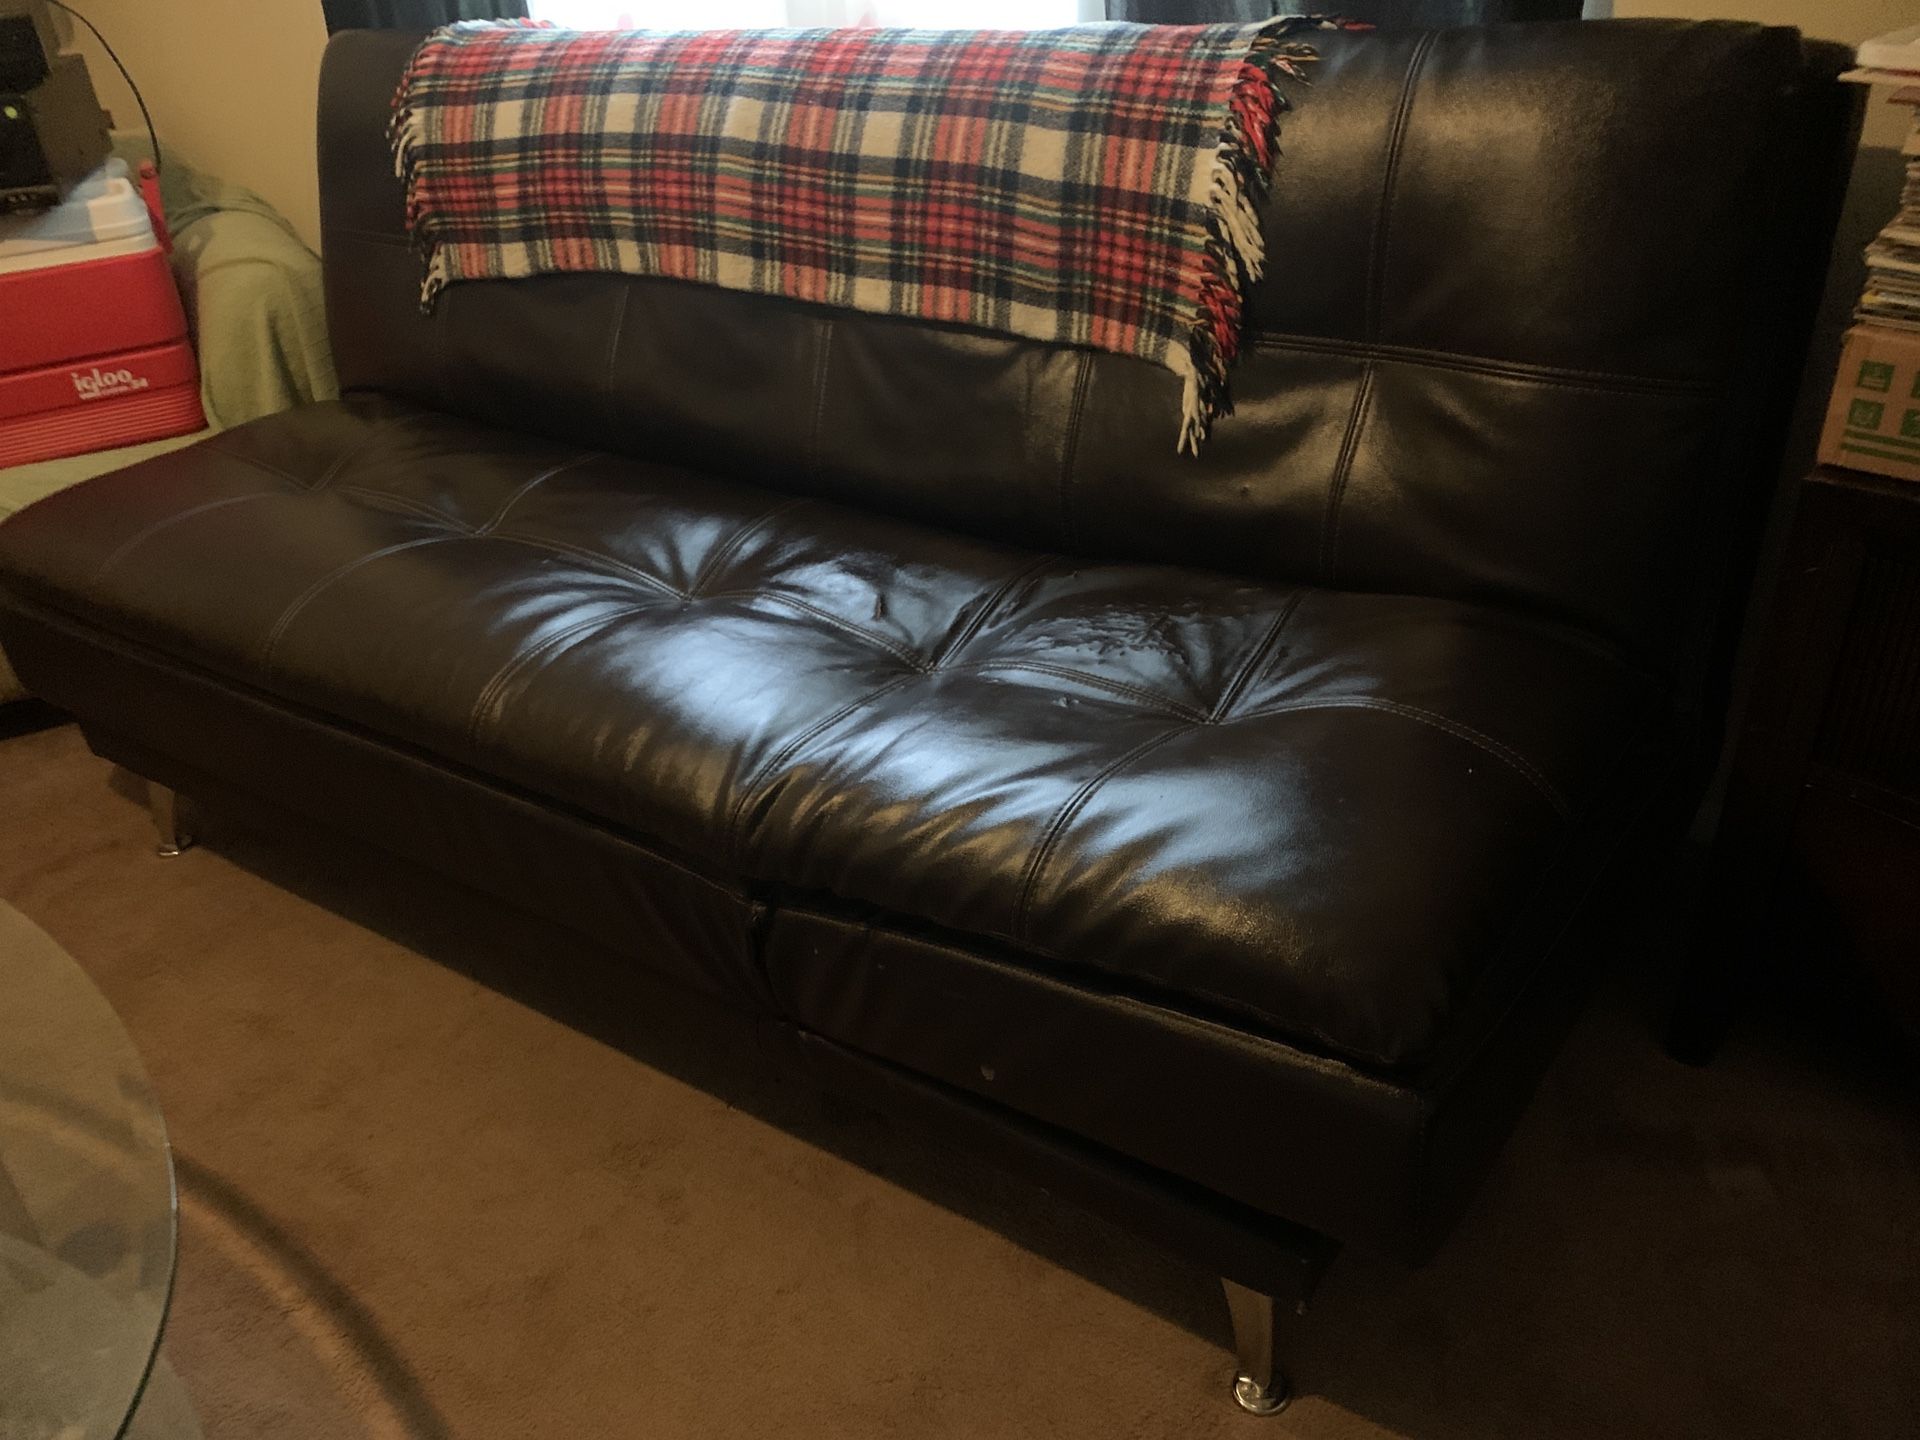 Serta Meredith convertible sofa futon with USB ports has scratches on the seat see picture Paid $400 brand new Bring a friend to help load Buy as i